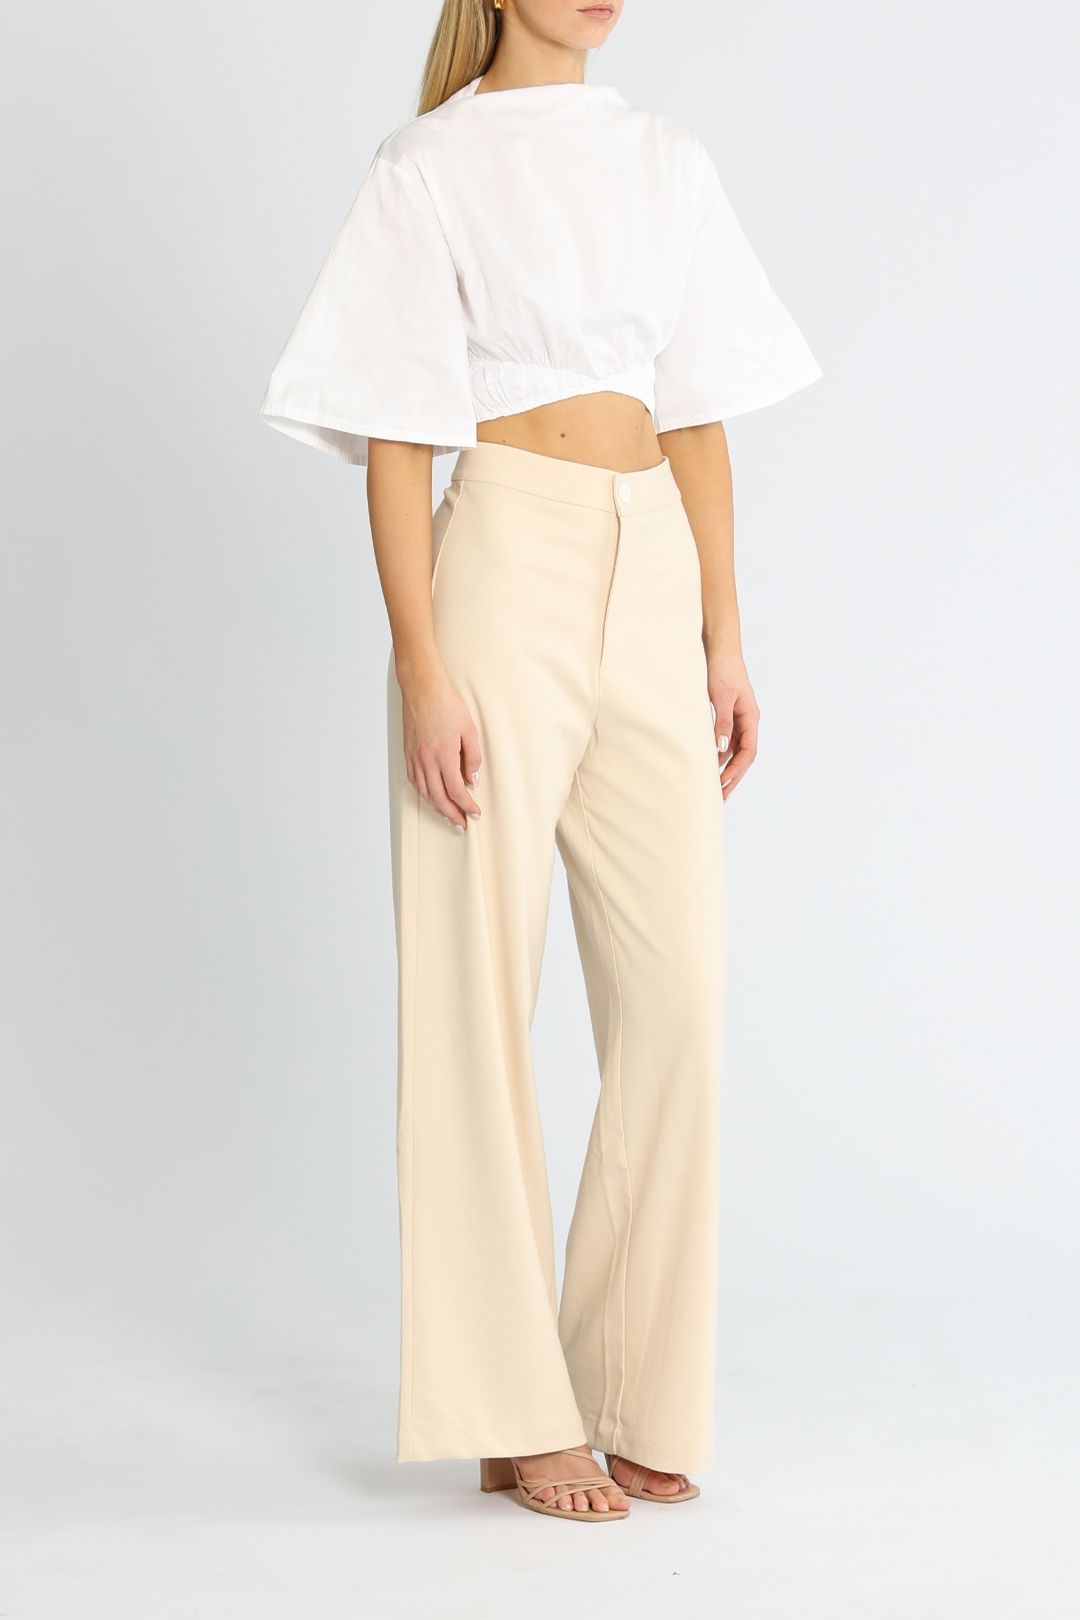 Staple The Label Ana Wide Leg Pant high